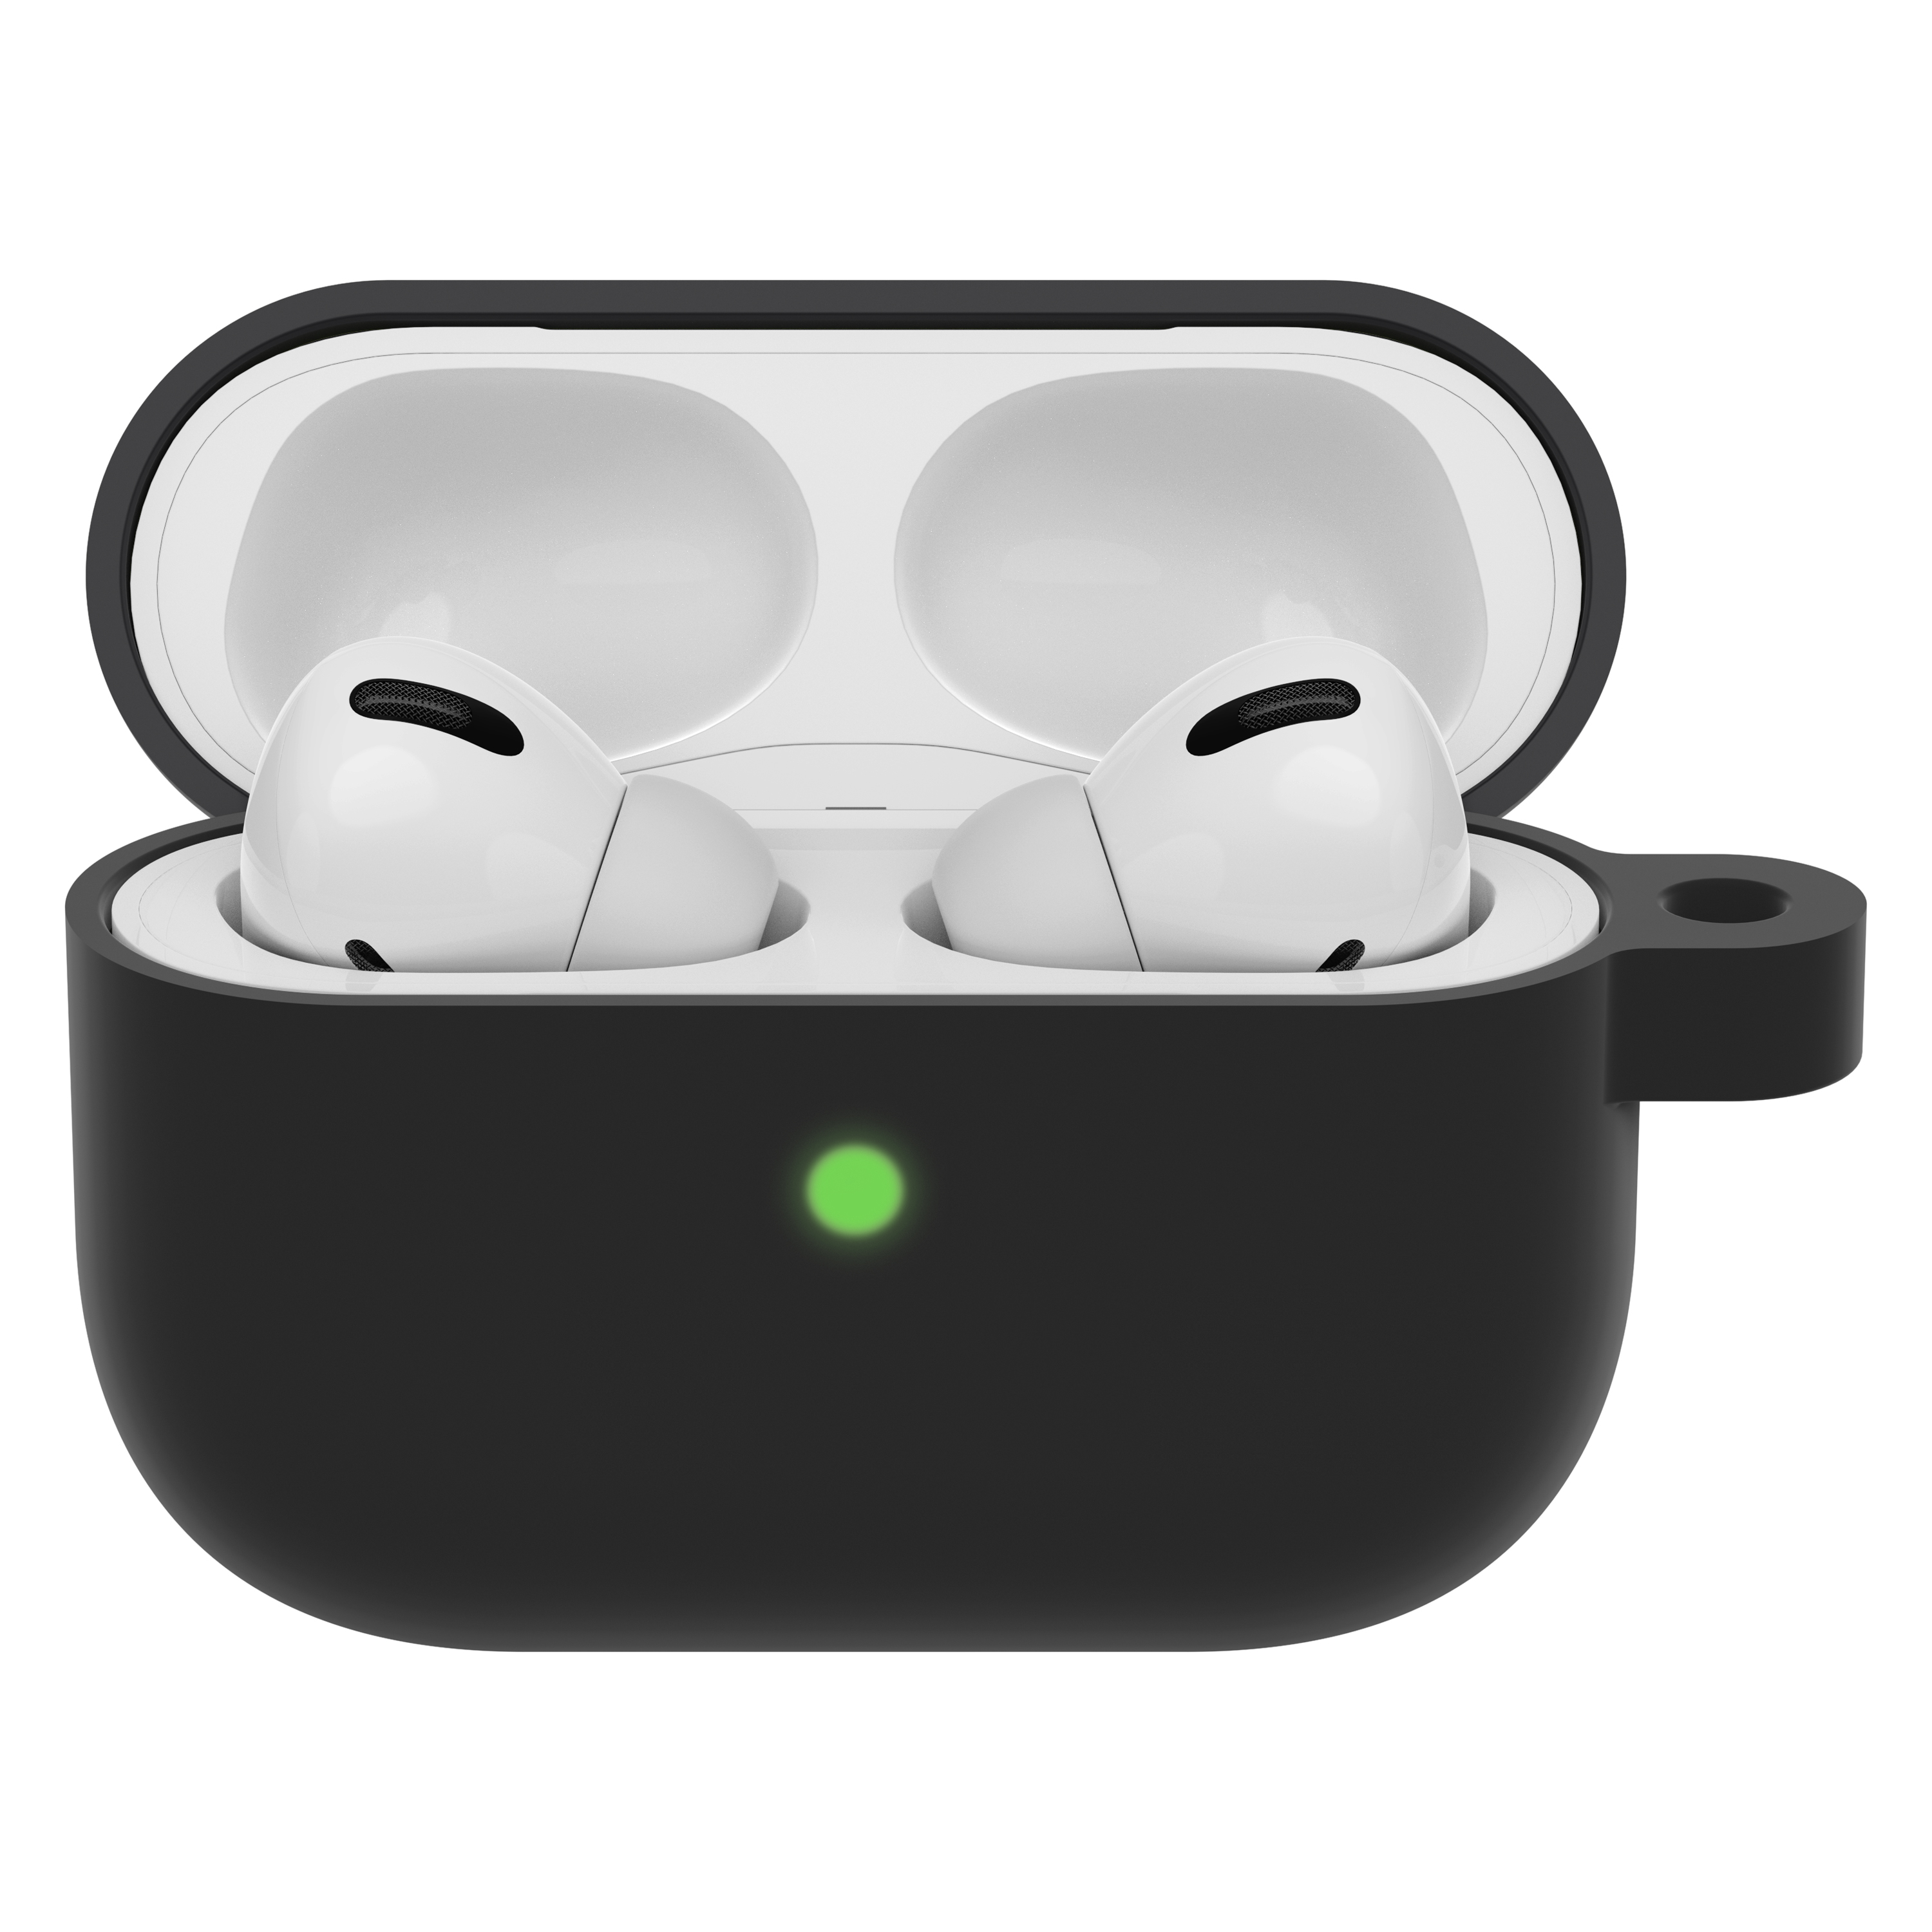 https://www.otterbox.fr/on/demandware.static/-/Sites-masterCatalog/default/dw491da8e9/productimages/dis/cases-screen-protection/soft-touch-airpods-pro/soft-touch-airpods-pro-blacktaffy-1.jpg